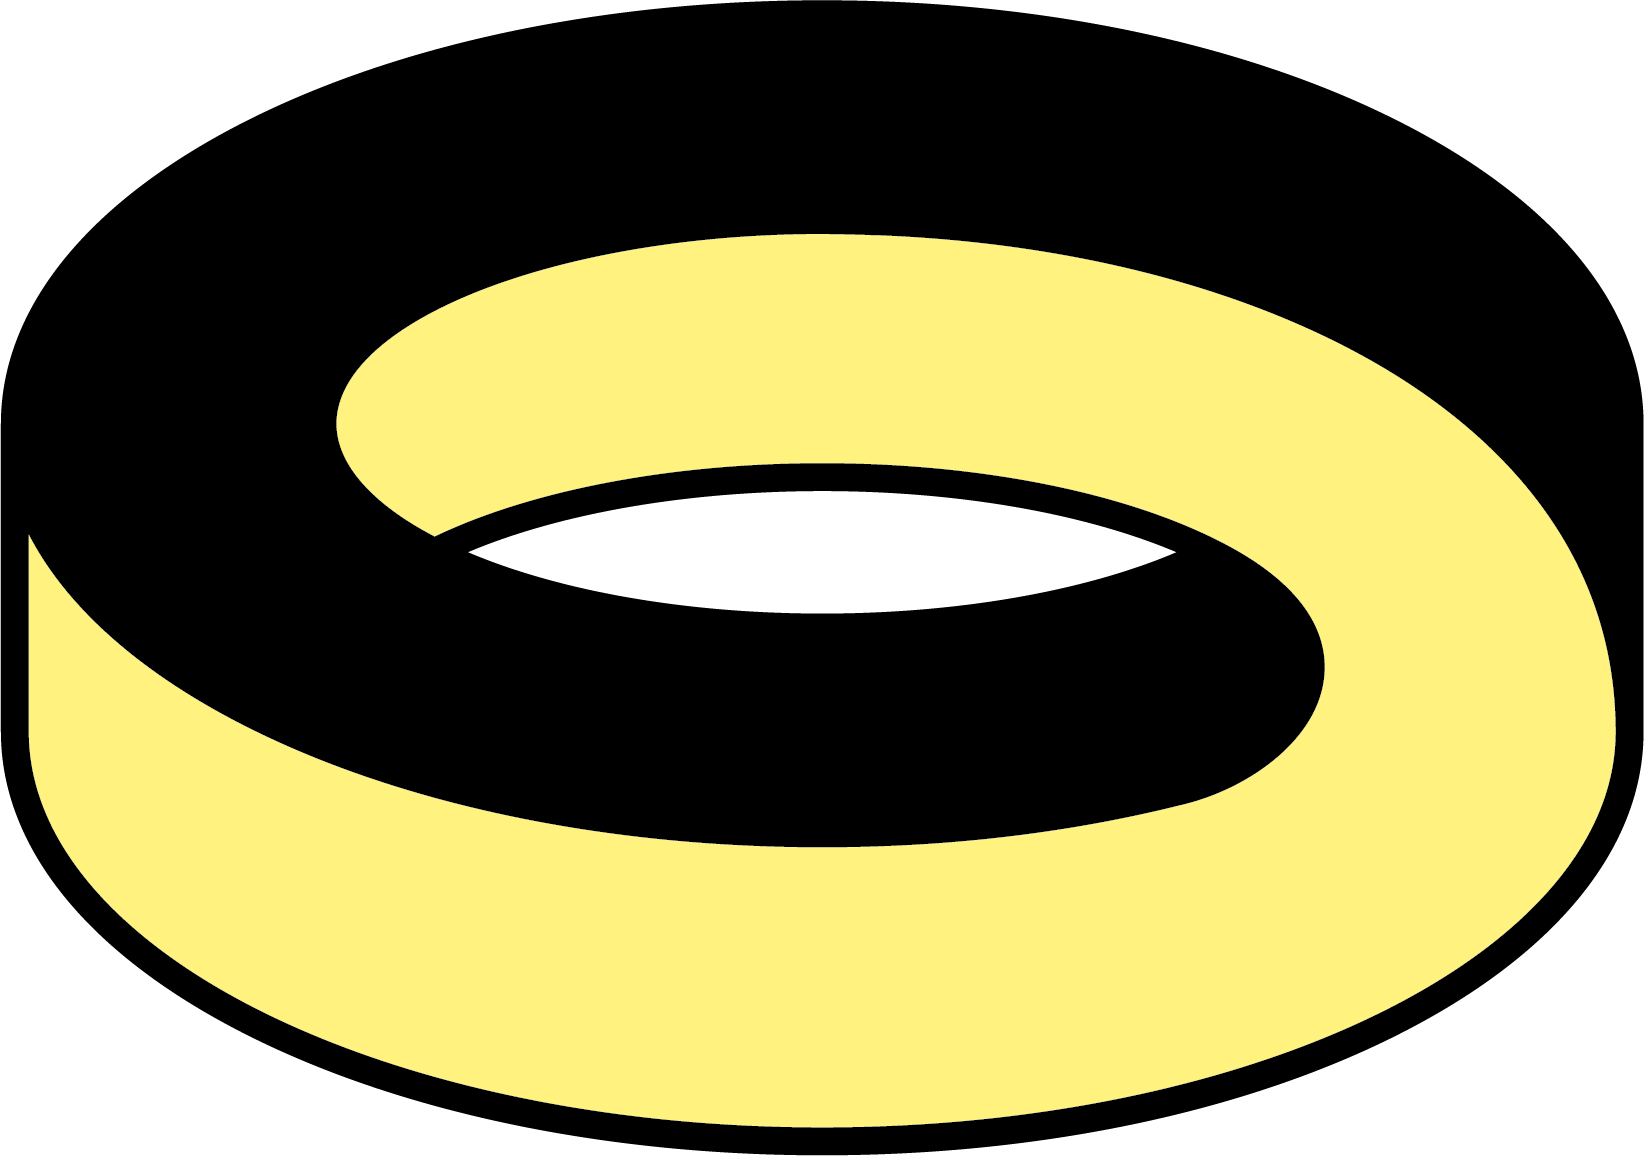 A cirkle in yellow and black. CPS' logo.